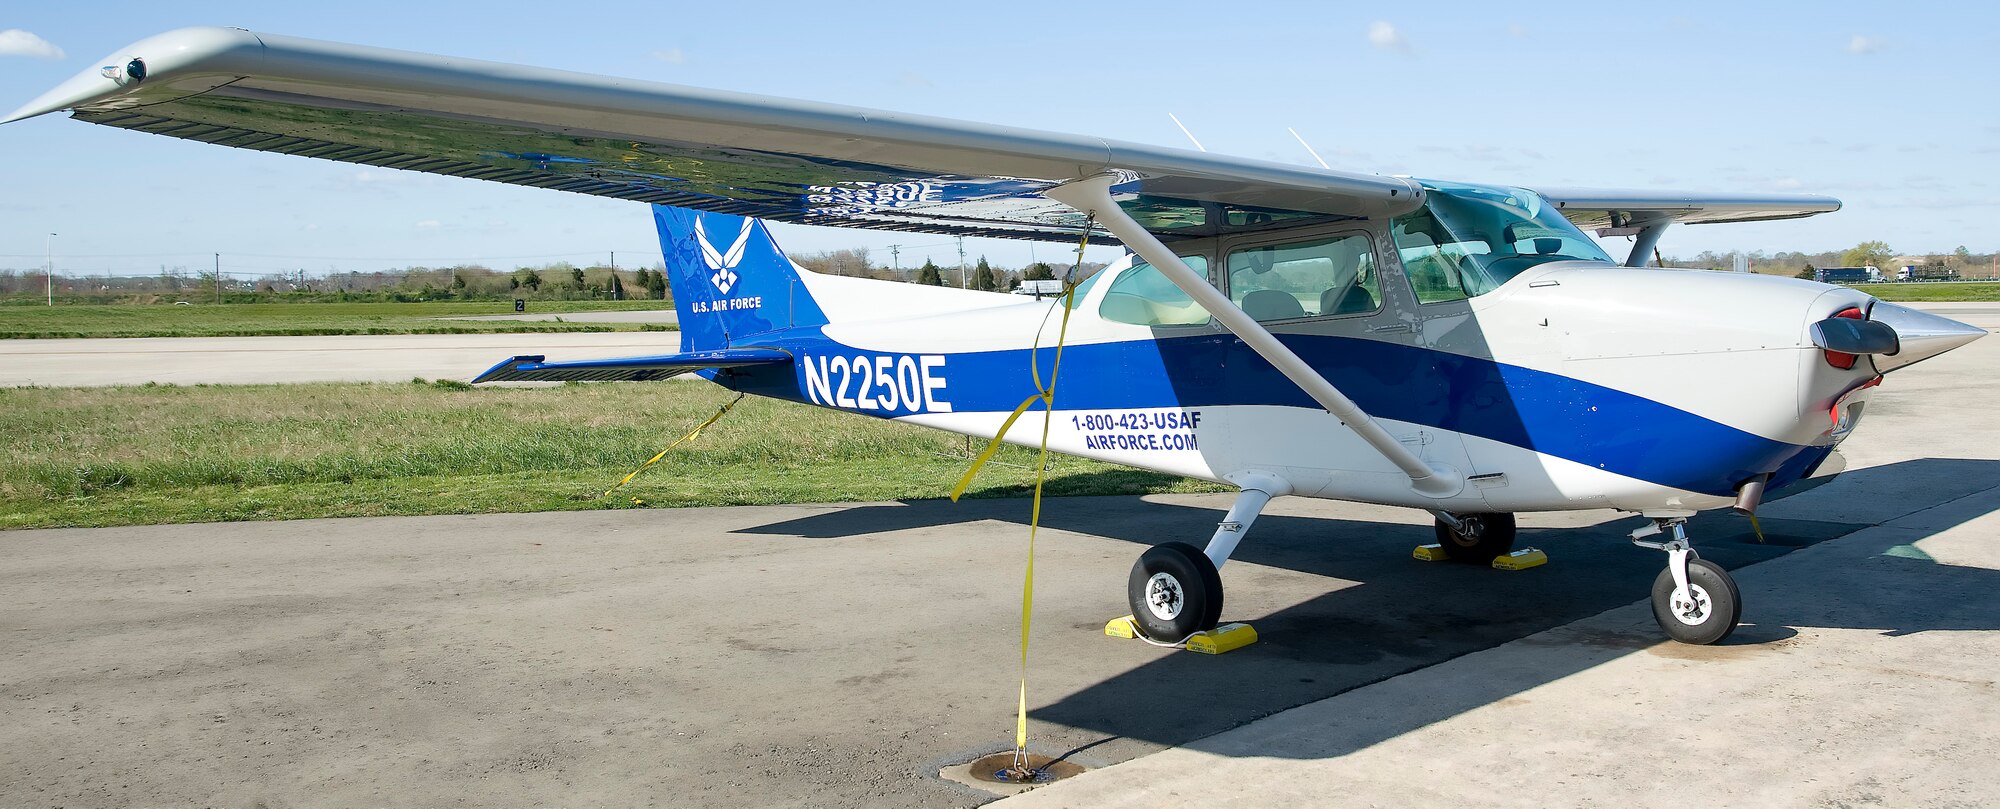 A Cessna 172 sits on the flightline at the Aero Club March 29, 2012, at Dover Air Force Base, Del. The Cessna 172 is just one of many planes available for use during the Aero Club’s “Learn to Fly” class. (U.S. Air Force photo by Adrian R. Rowan)